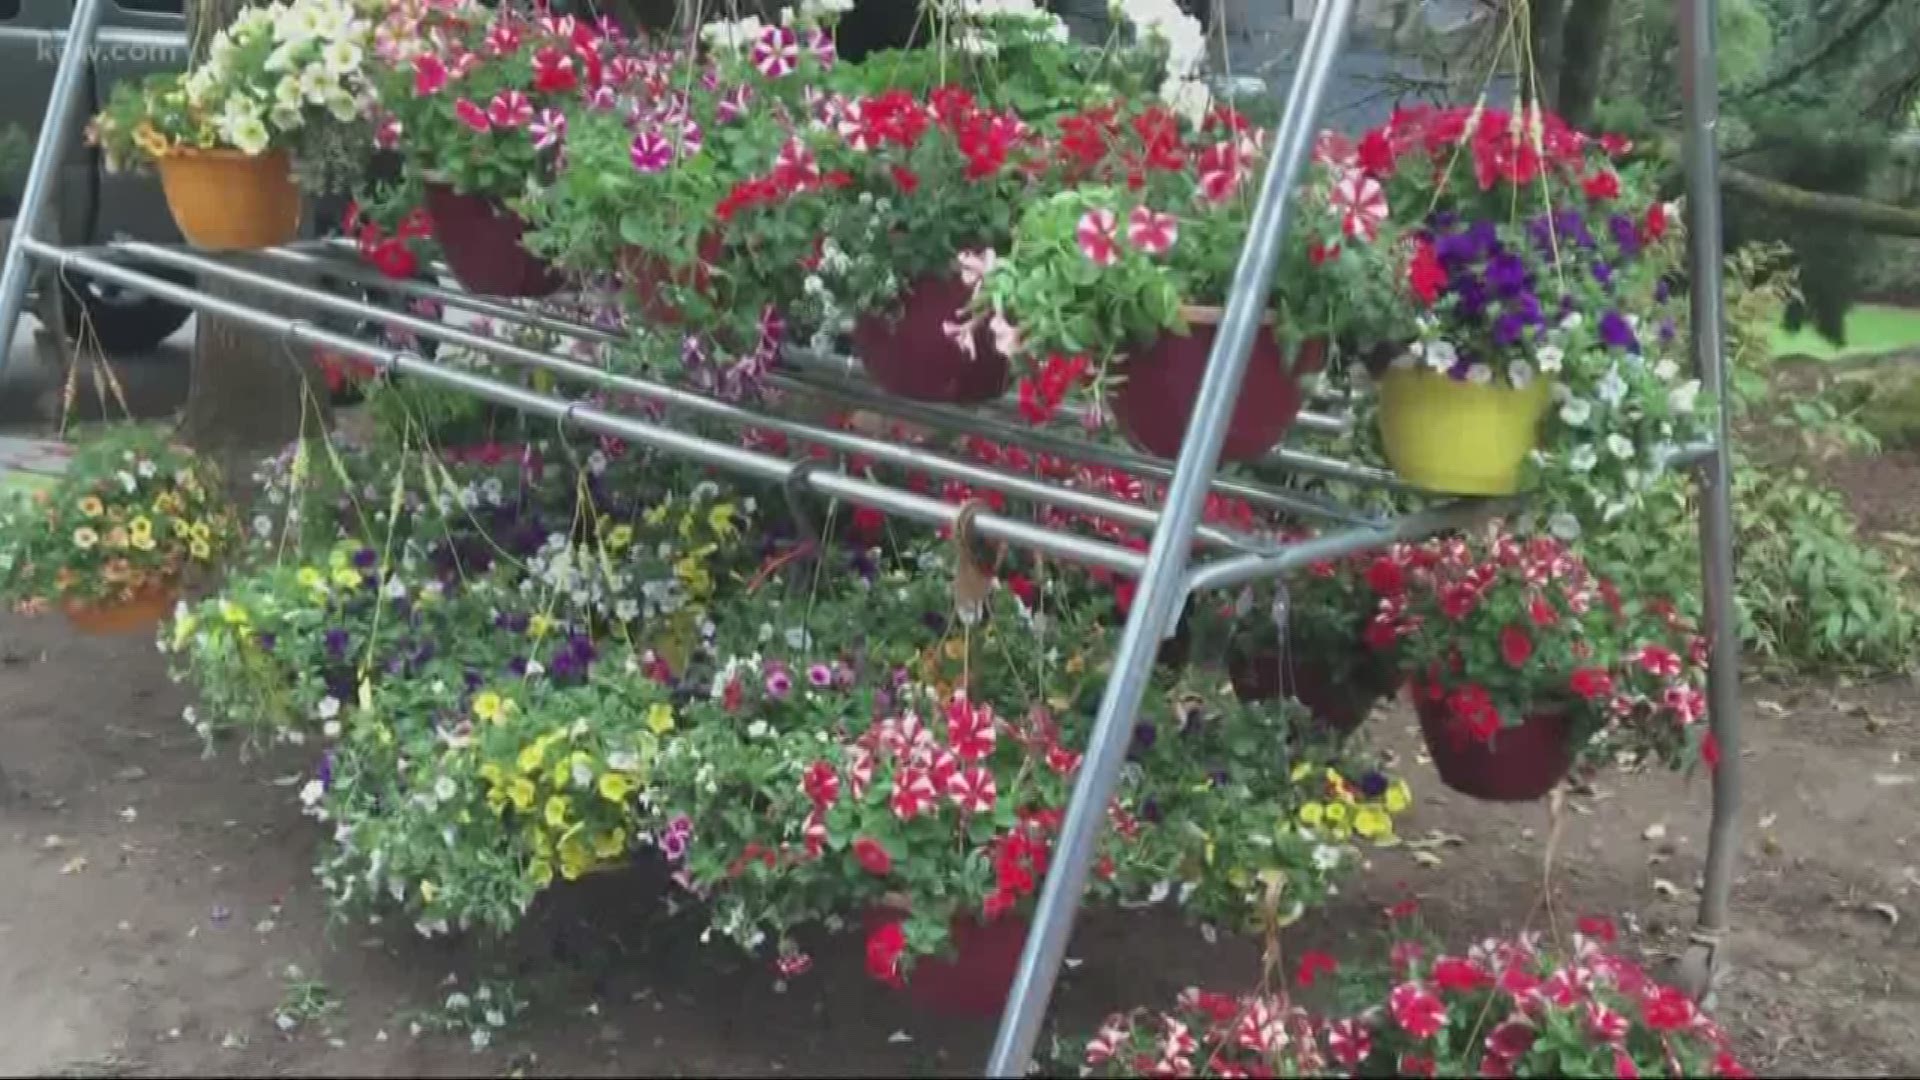 A Vancouver man is suspected of stealing plants from garden stores.